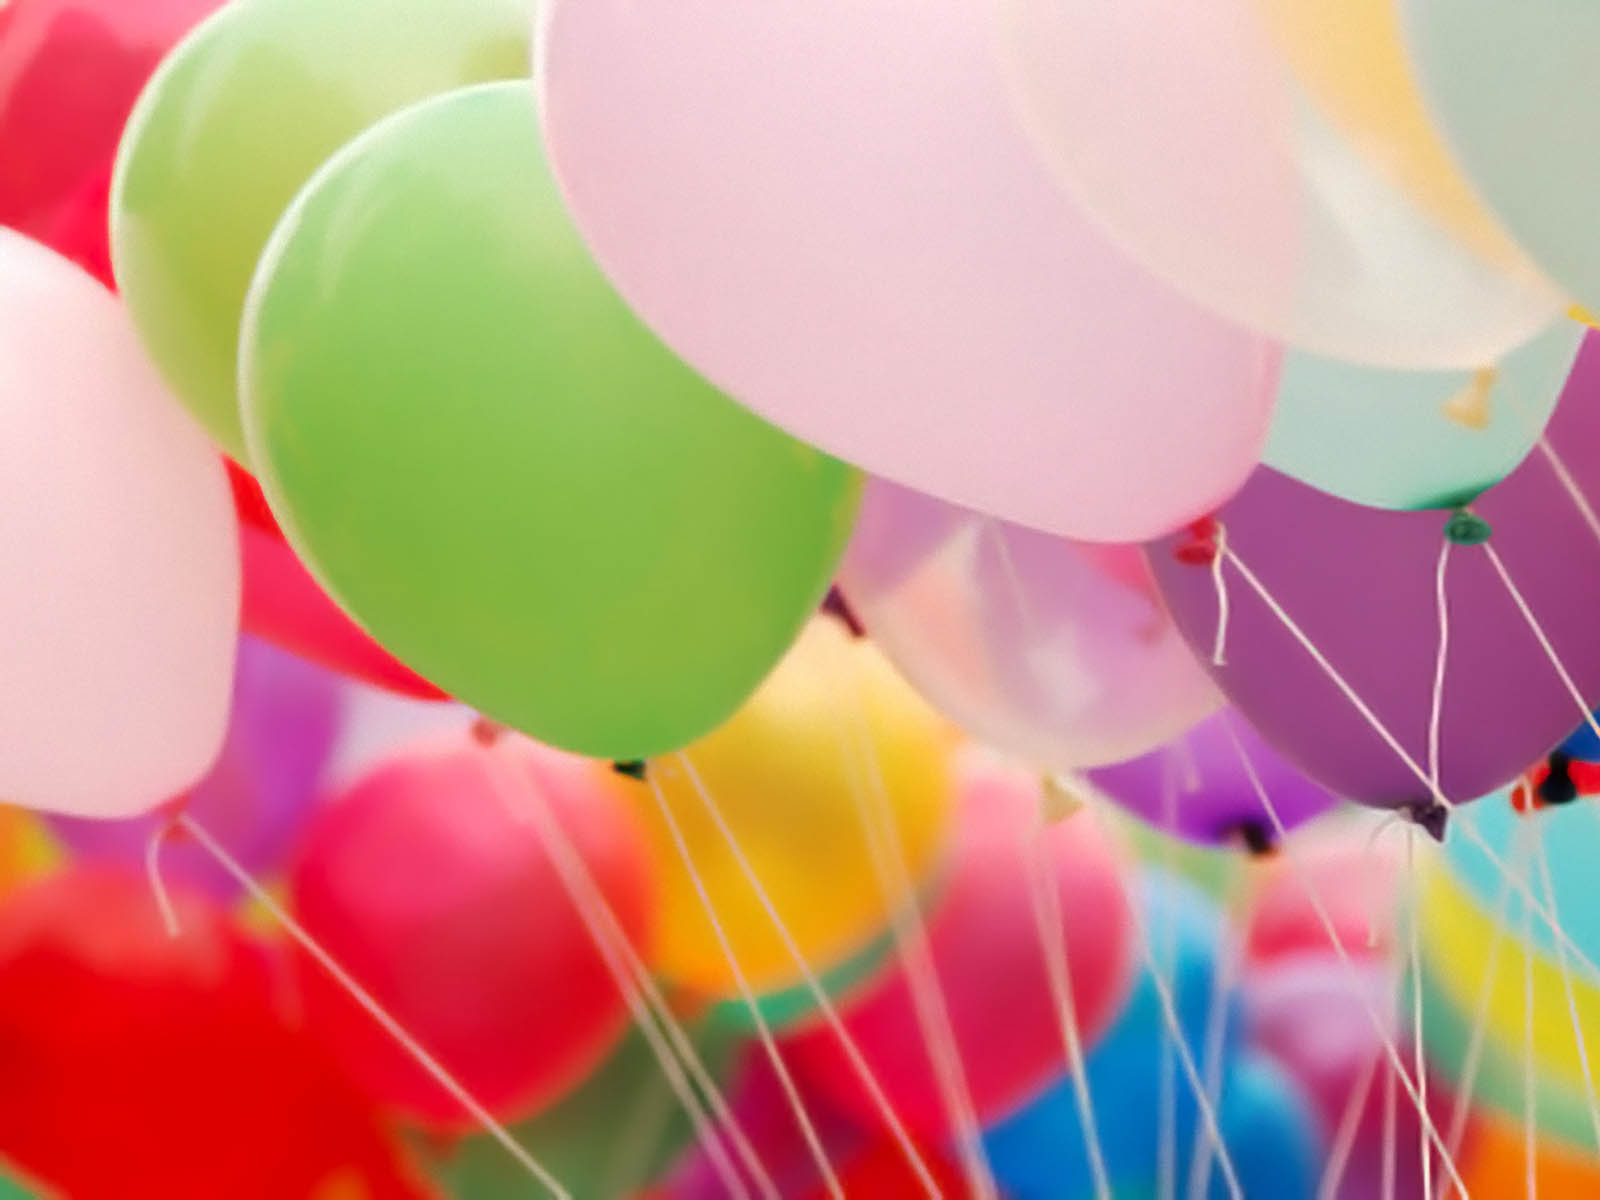 Wallpapers: Balloons Wallpapers